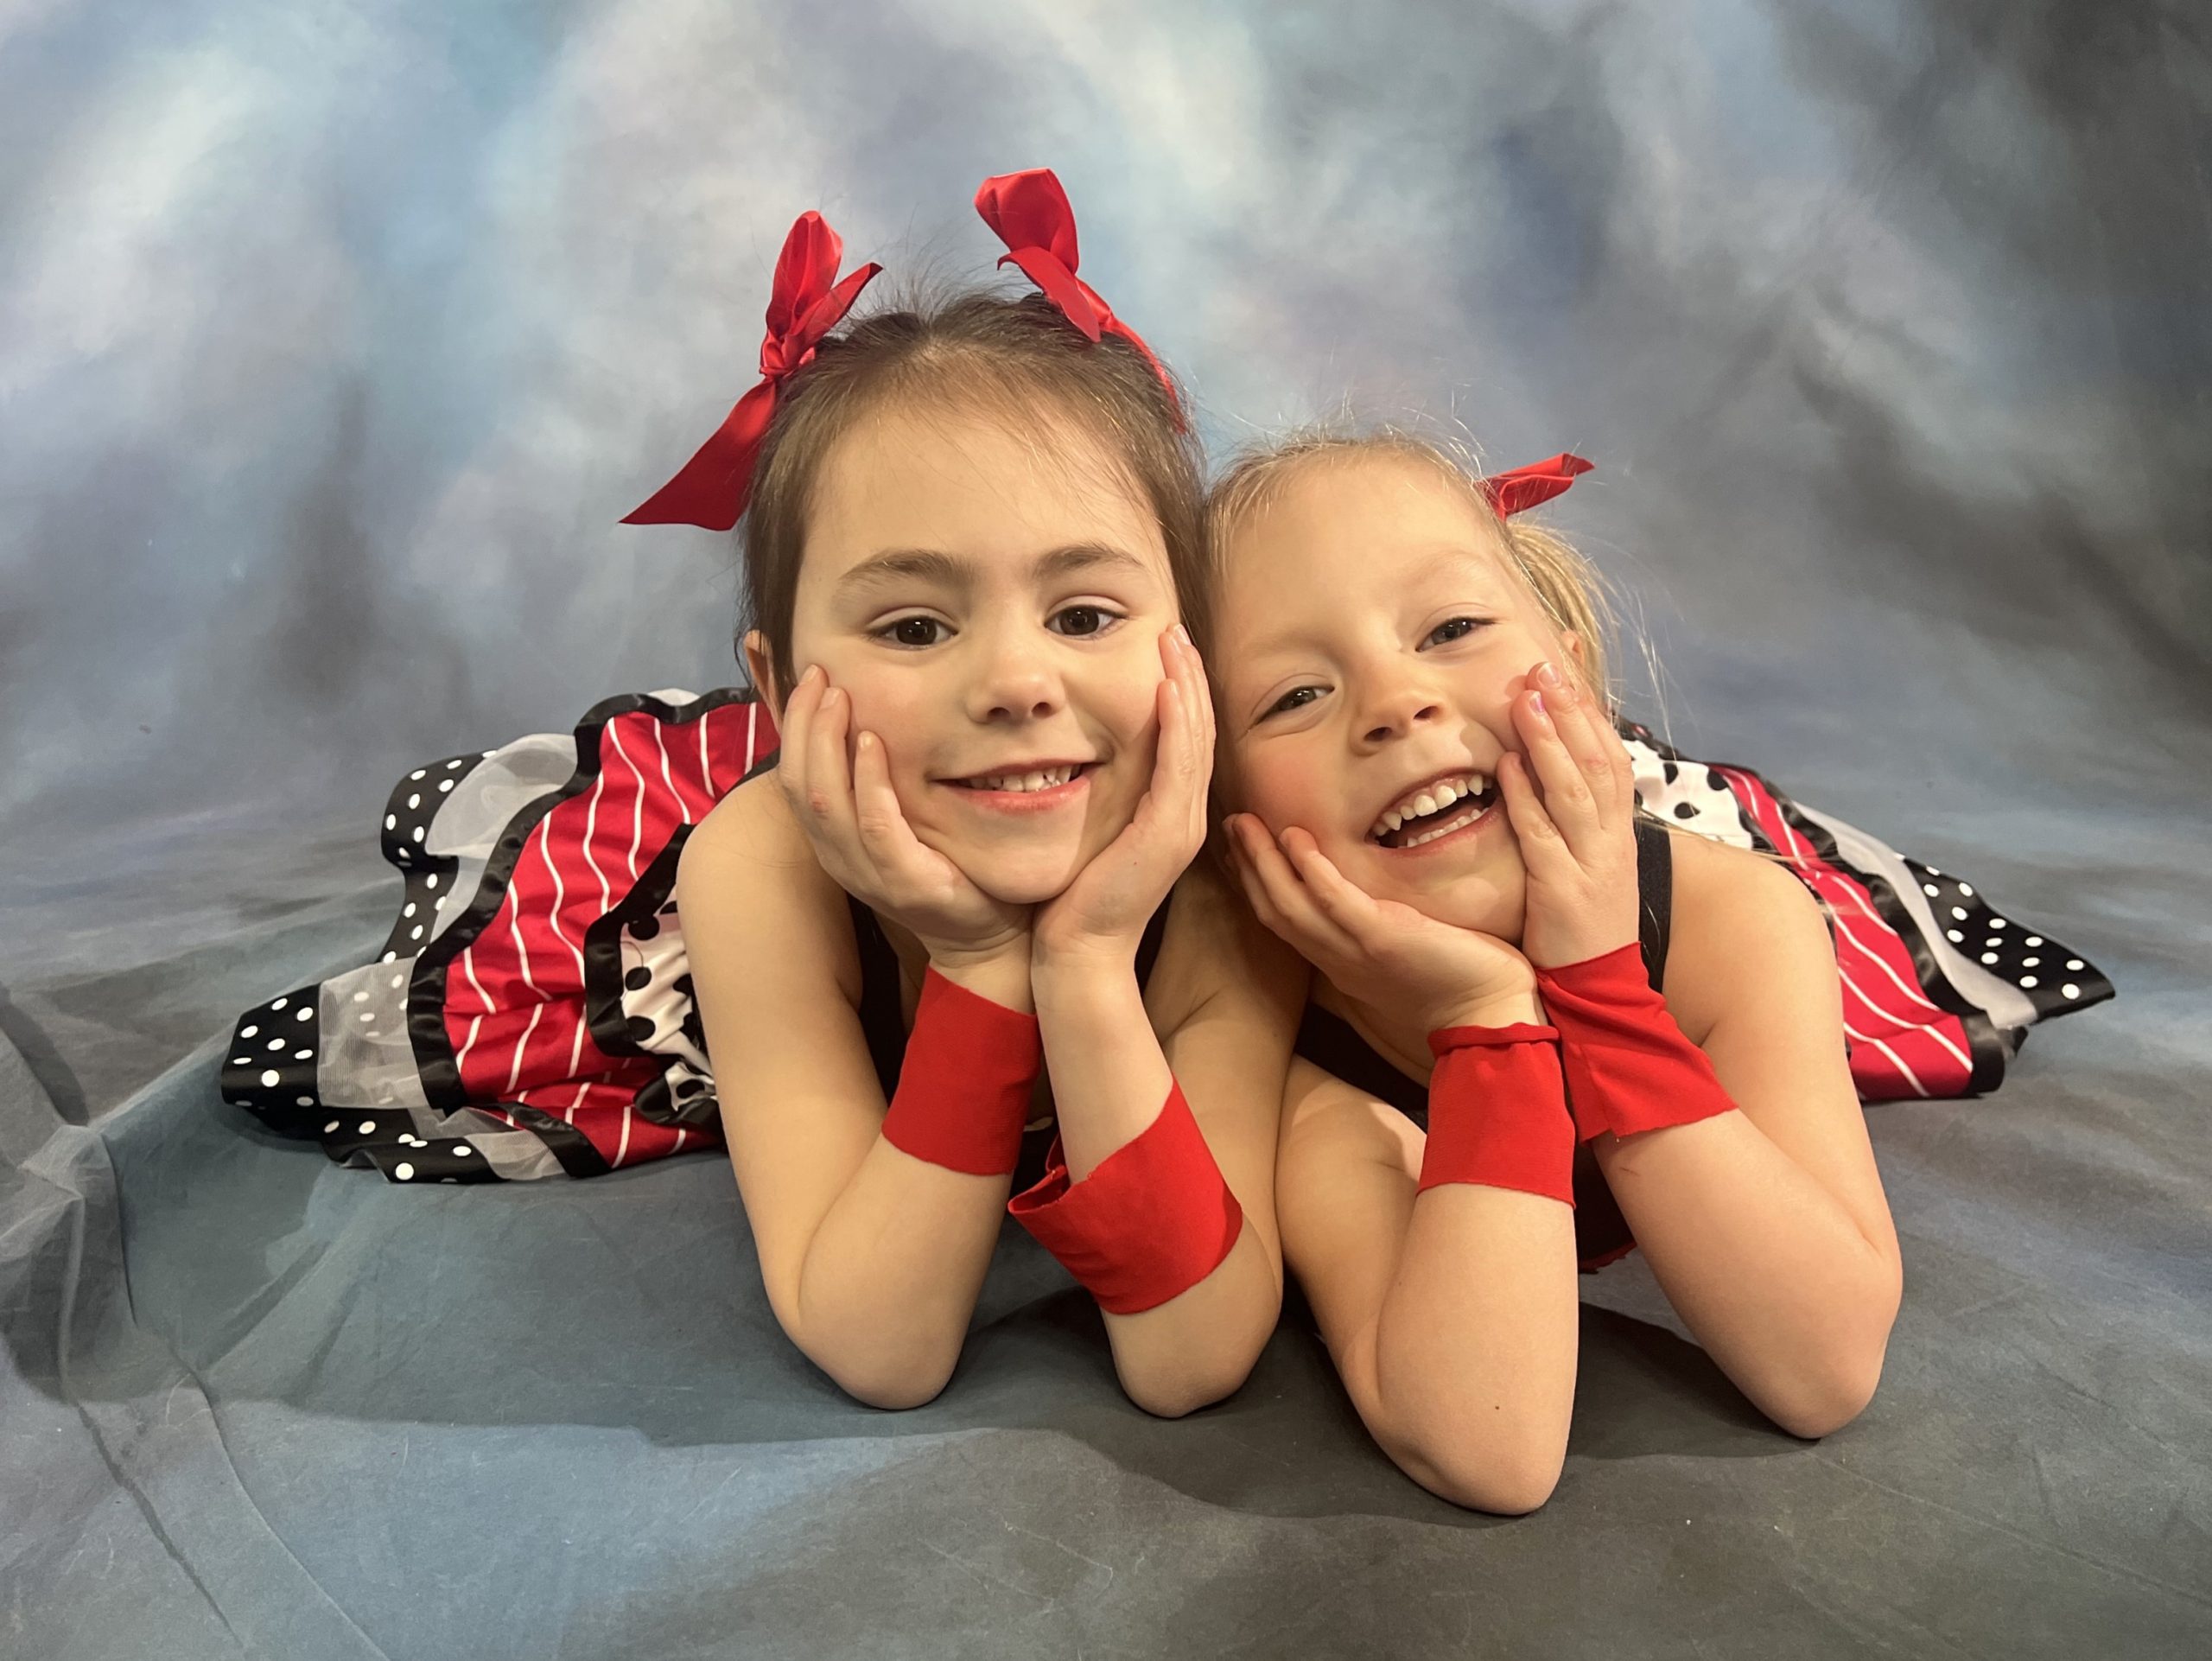 Two girls in red and polka dot tutus lying on ground